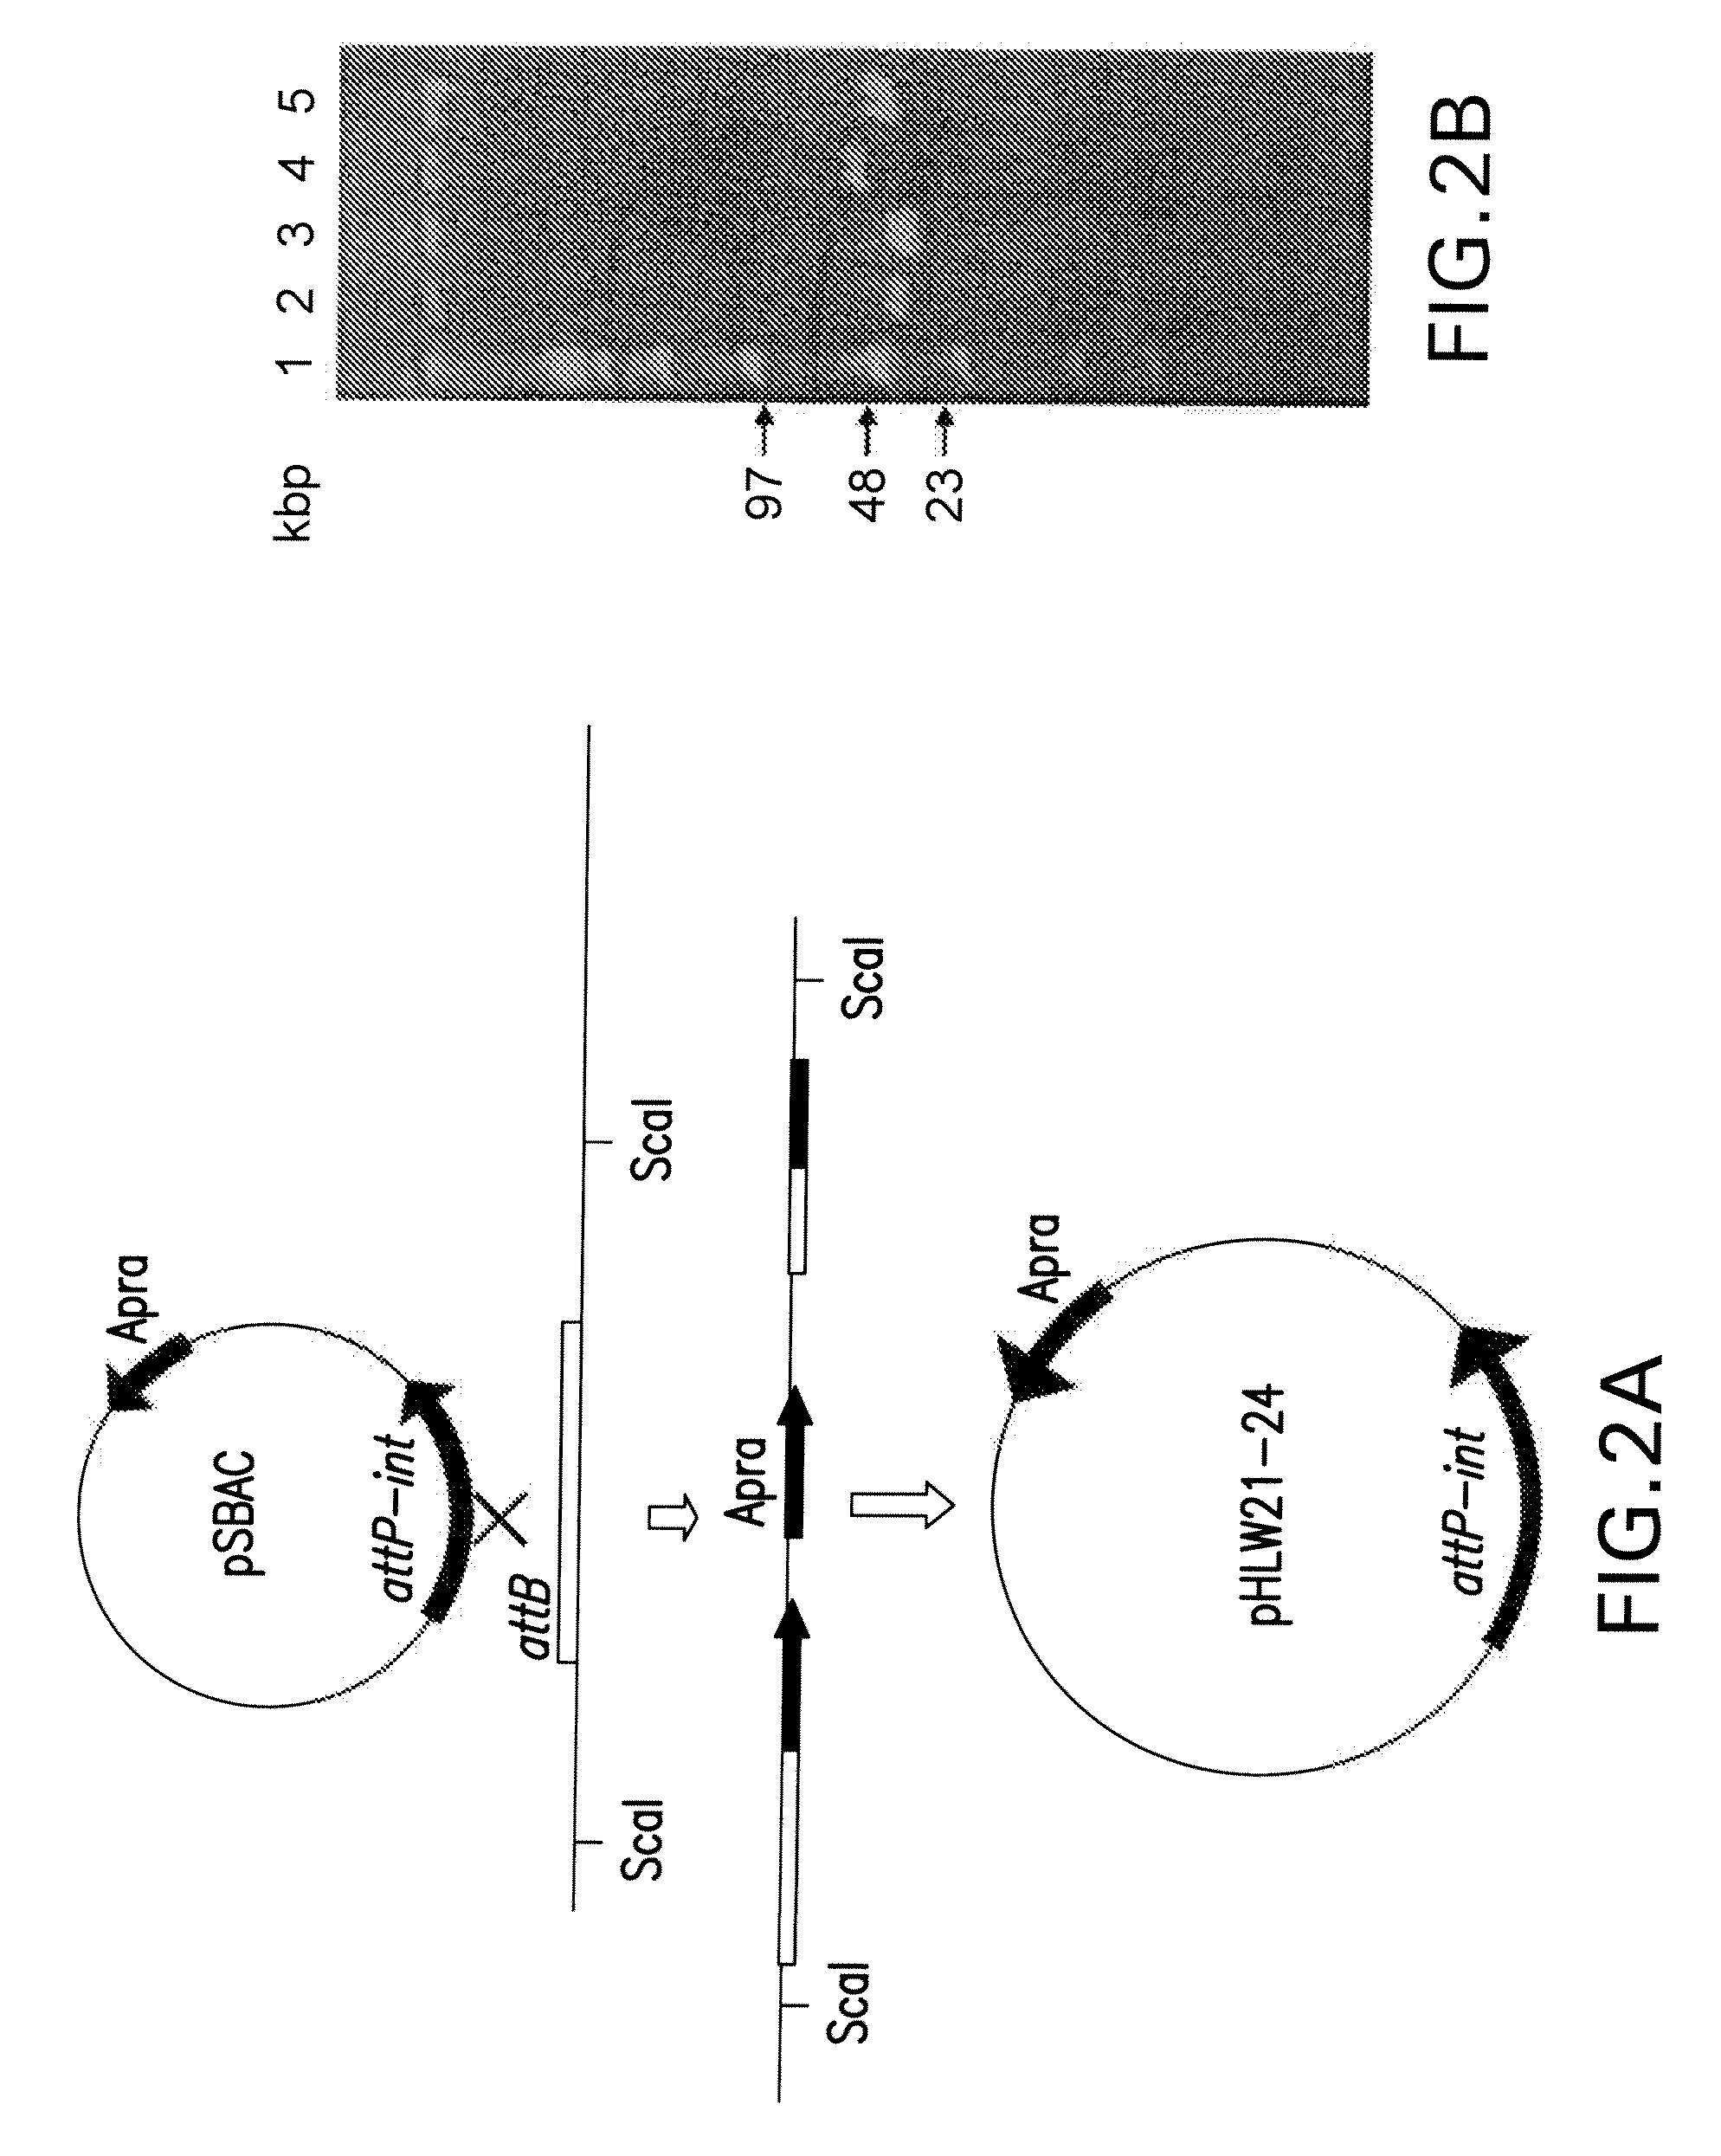 Vectors and Methods for Cloning Gene Clusters or Portions Thereof